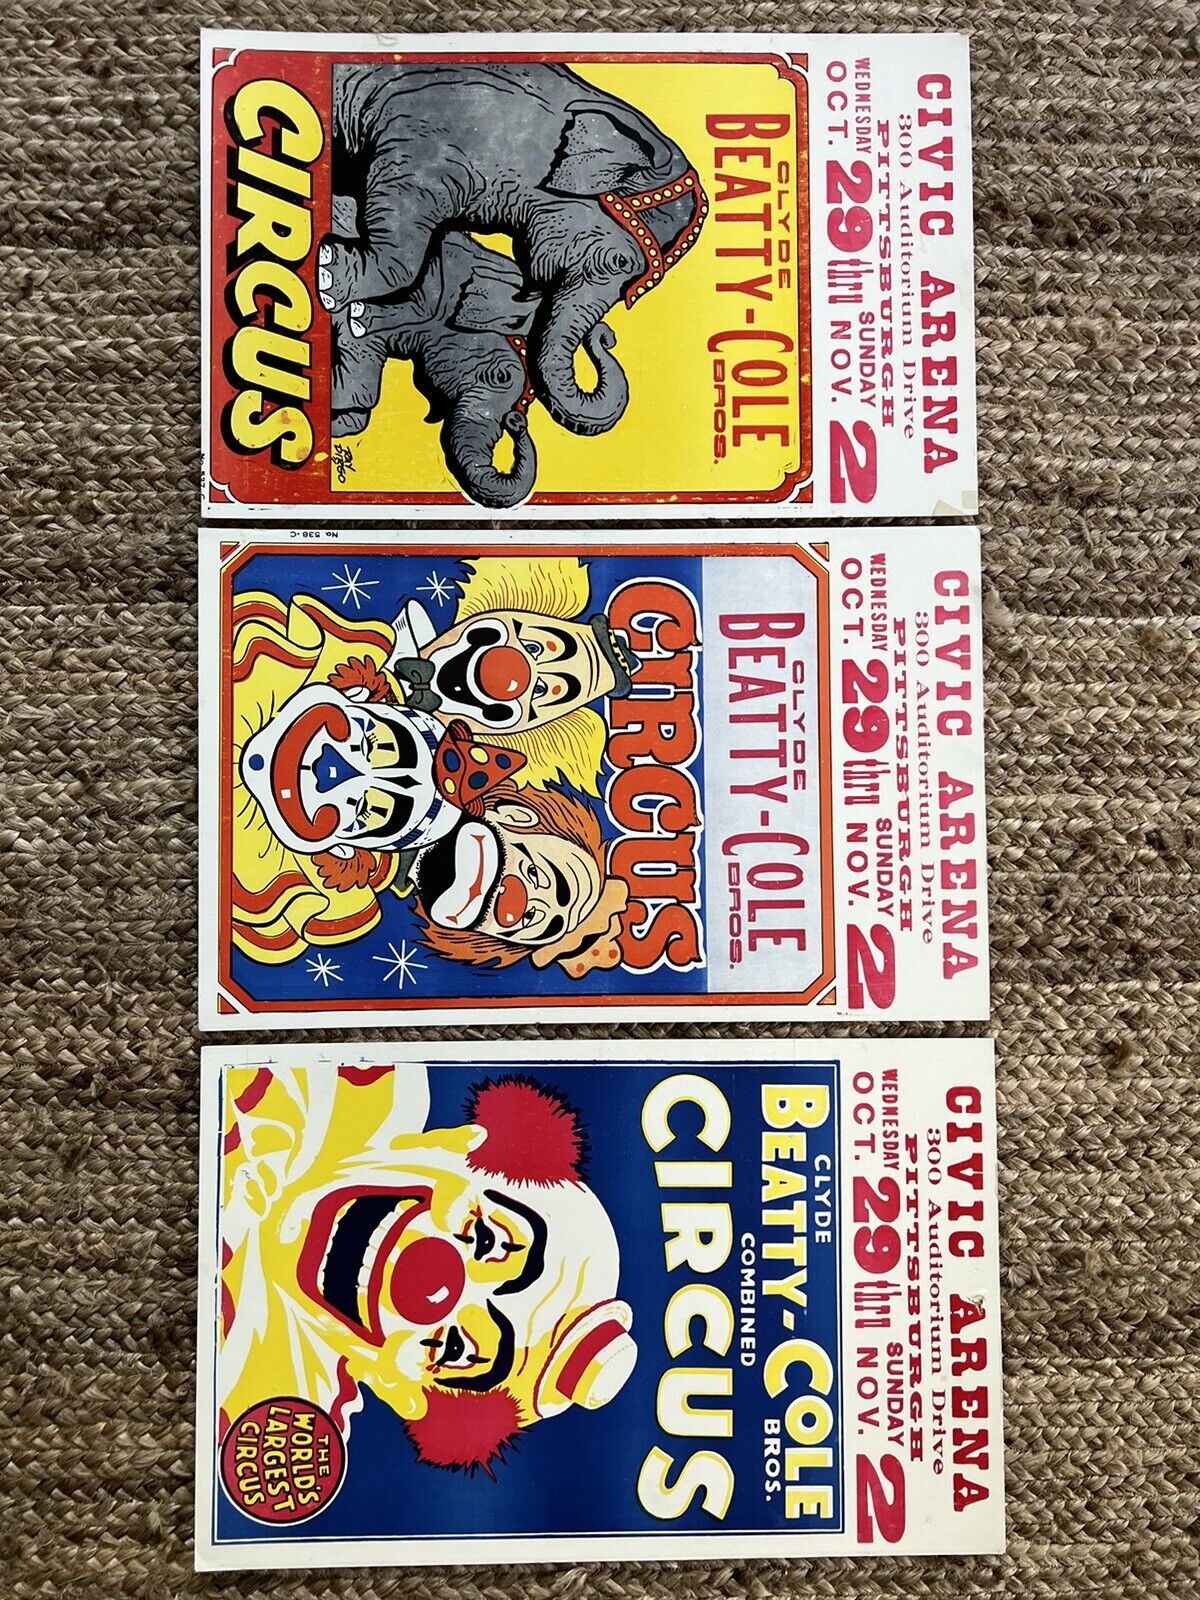 3 VTG Clyde Beatty Cole Bros Circus Cardboard Poster Pittsburgh Clown Elephant